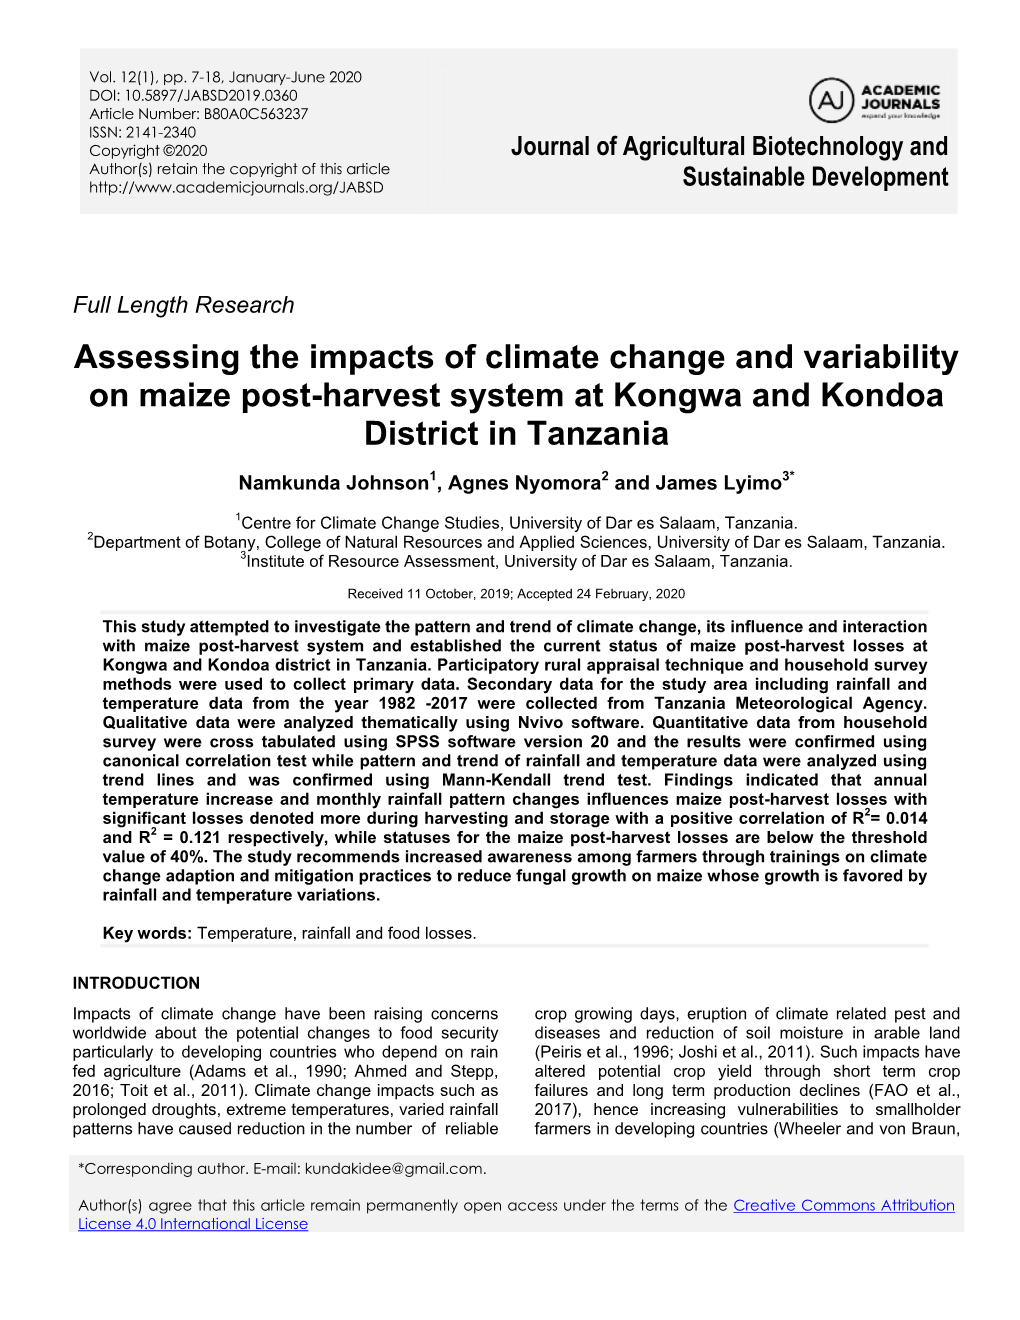 Assessing the Impacts of Climate Change and Variability on Maize Post-Harvest System at Kongwa and Kondoa District in Tanzania